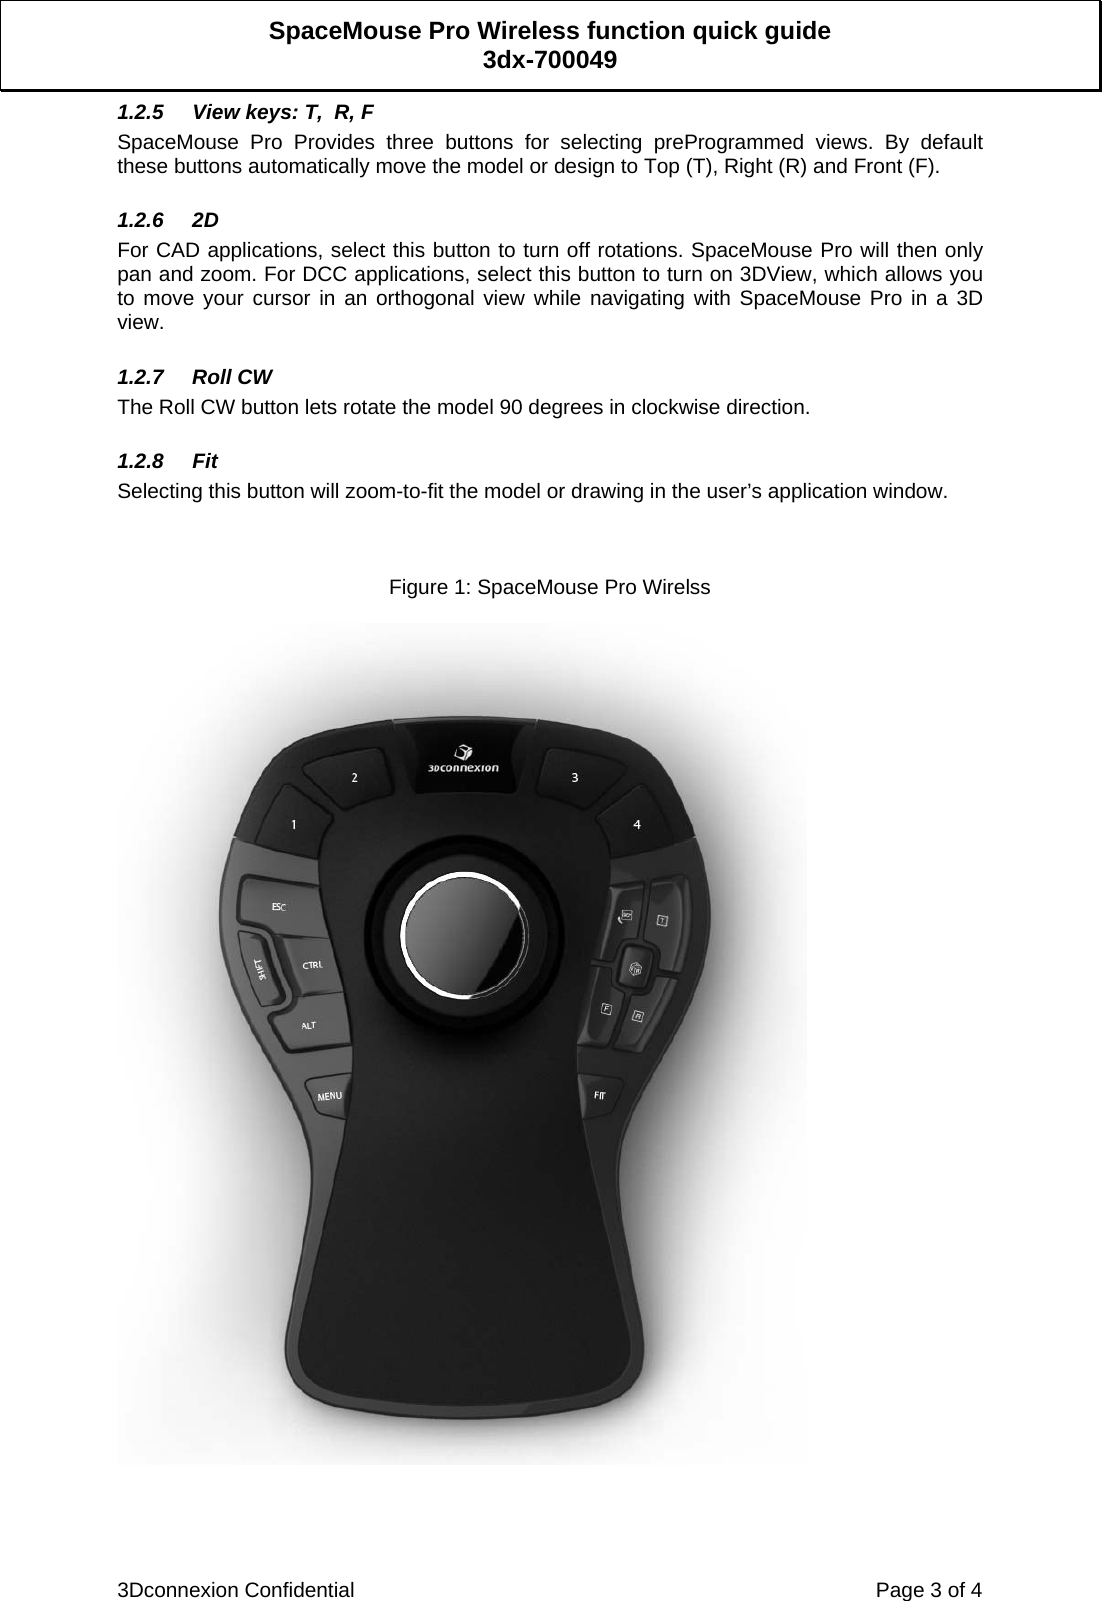  3Dconnexion Confidential    Page 3 of 4 SpaceMouse Pro Wireless function quick guide 3dx-700049 1.2.5  View keys: T,  R, F SpaceMouse Pro Provides three buttons for selecting preProgrammed views. By default these buttons automatically move the model or design to Top (T), Right (R) and Front (F).  1.2.6 2D For CAD applications, select this button to turn off rotations. SpaceMouse Pro will then only pan and zoom. For DCC applications, select this button to turn on 3DView, which allows you to move your cursor in an orthogonal view while navigating with SpaceMouse Pro in a 3D view.  1.2.7 Roll CW The Roll CW button lets rotate the model 90 degrees in clockwise direction.  1.2.8 Fit Selecting this button will zoom-to-fit the model or drawing in the user’s application window.    Figure 1: SpaceMouse Pro Wirelss     